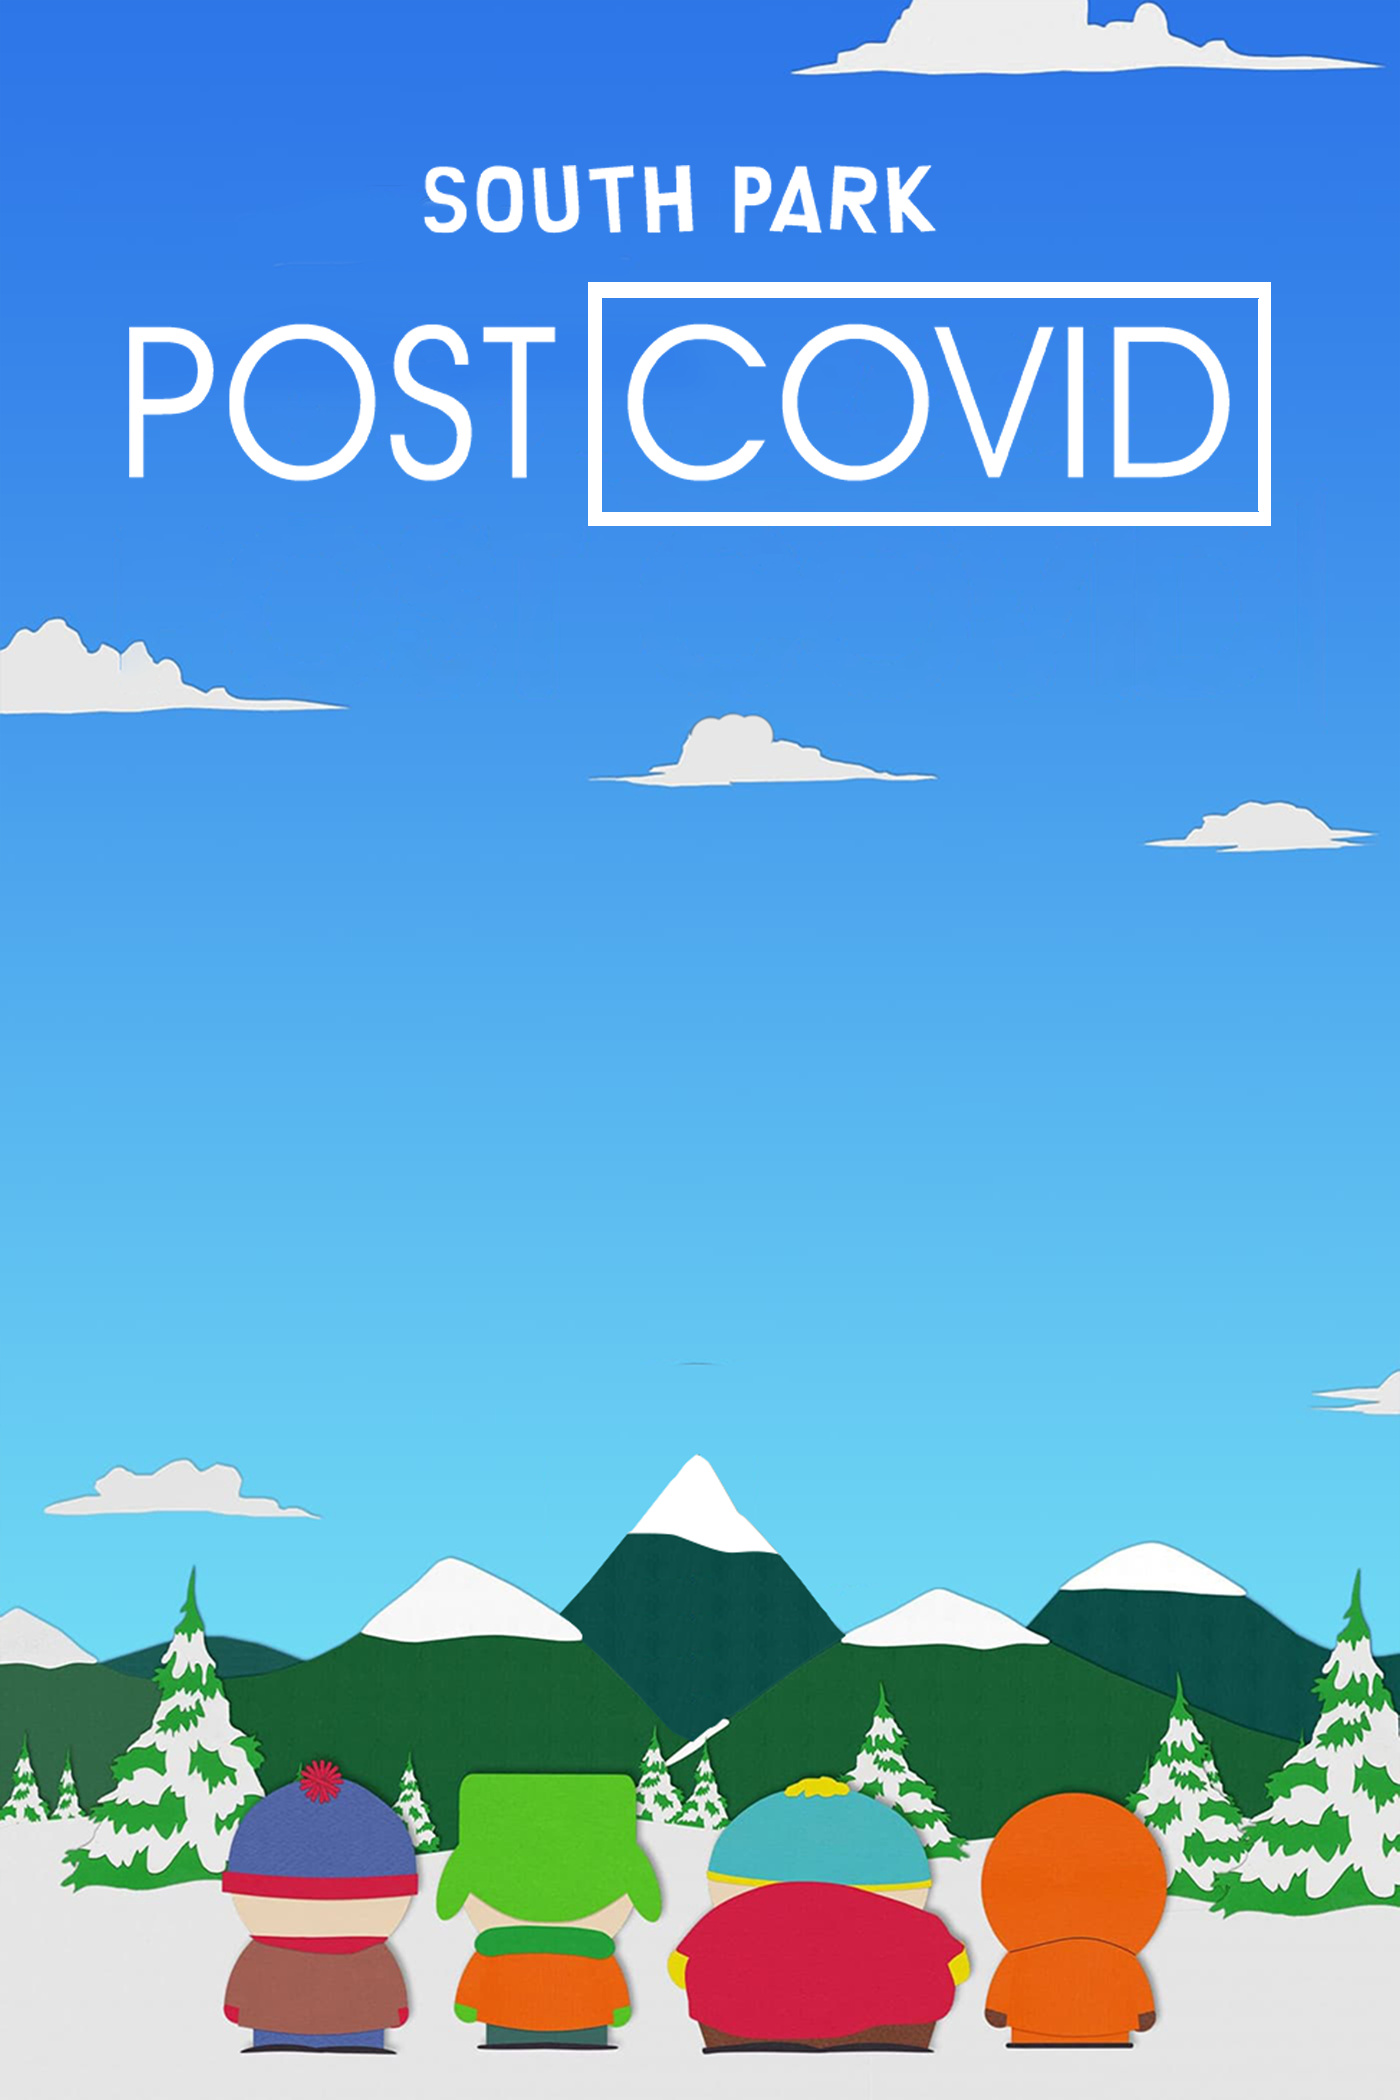 South Park Post COVID, Return of COVID, Red & white logos, Rplexposters, 1400x2100 HD Phone